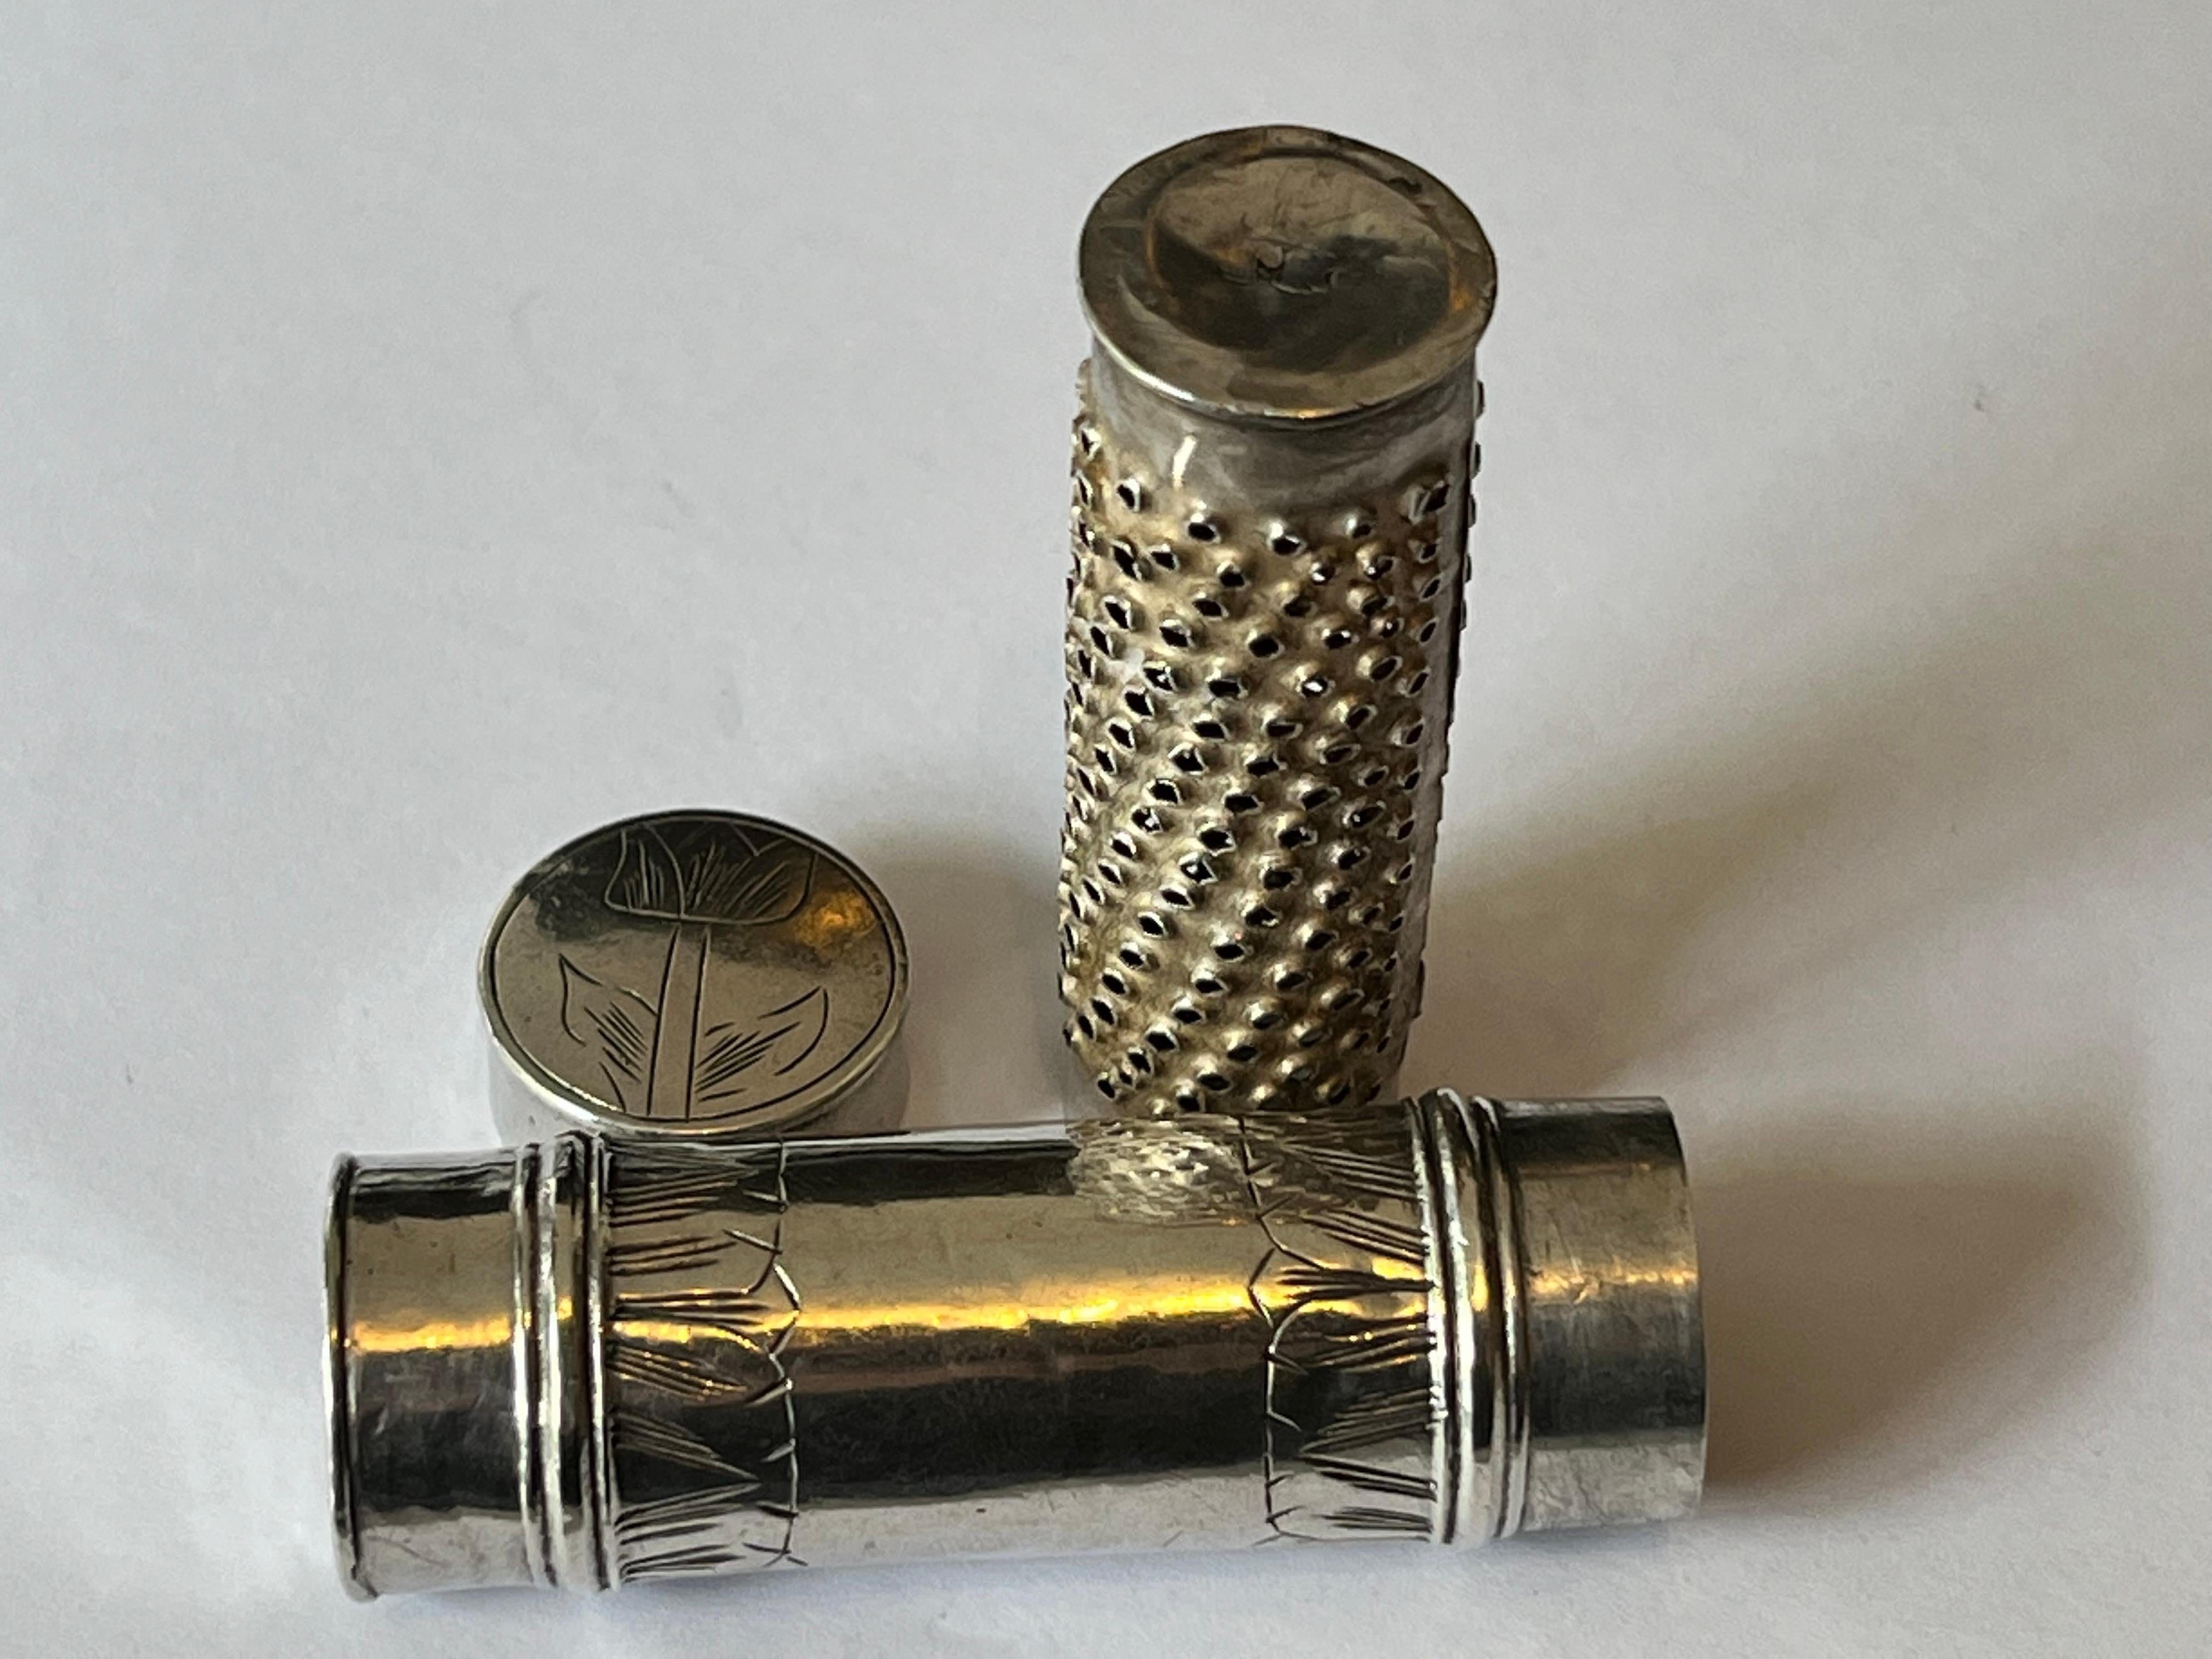 English An Extremely Rare 17th Century Silver Nutmeg Grater, c.1690